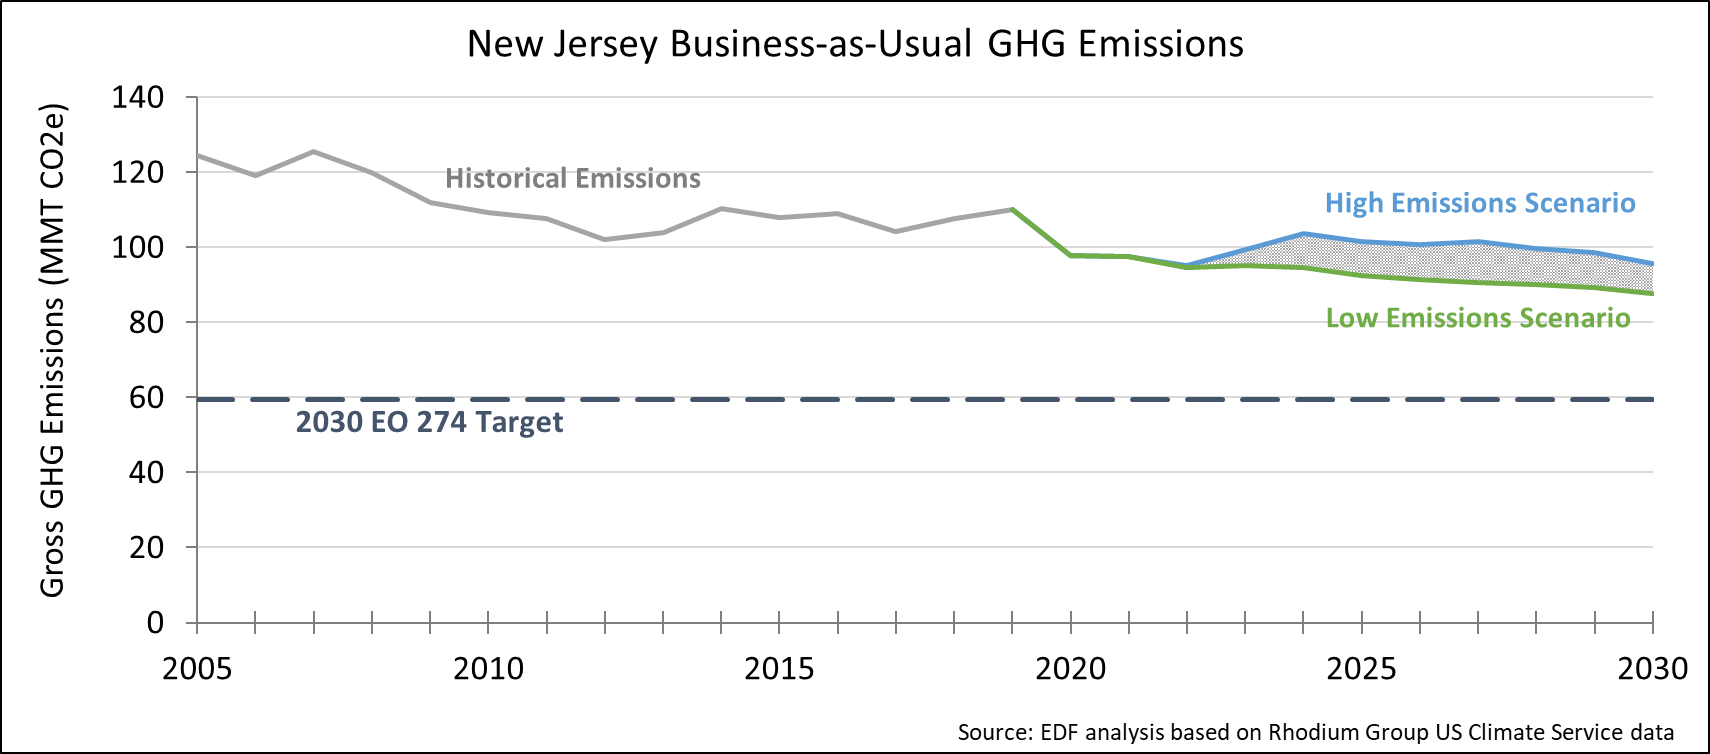 New Jersey's emissions projections for 2030.